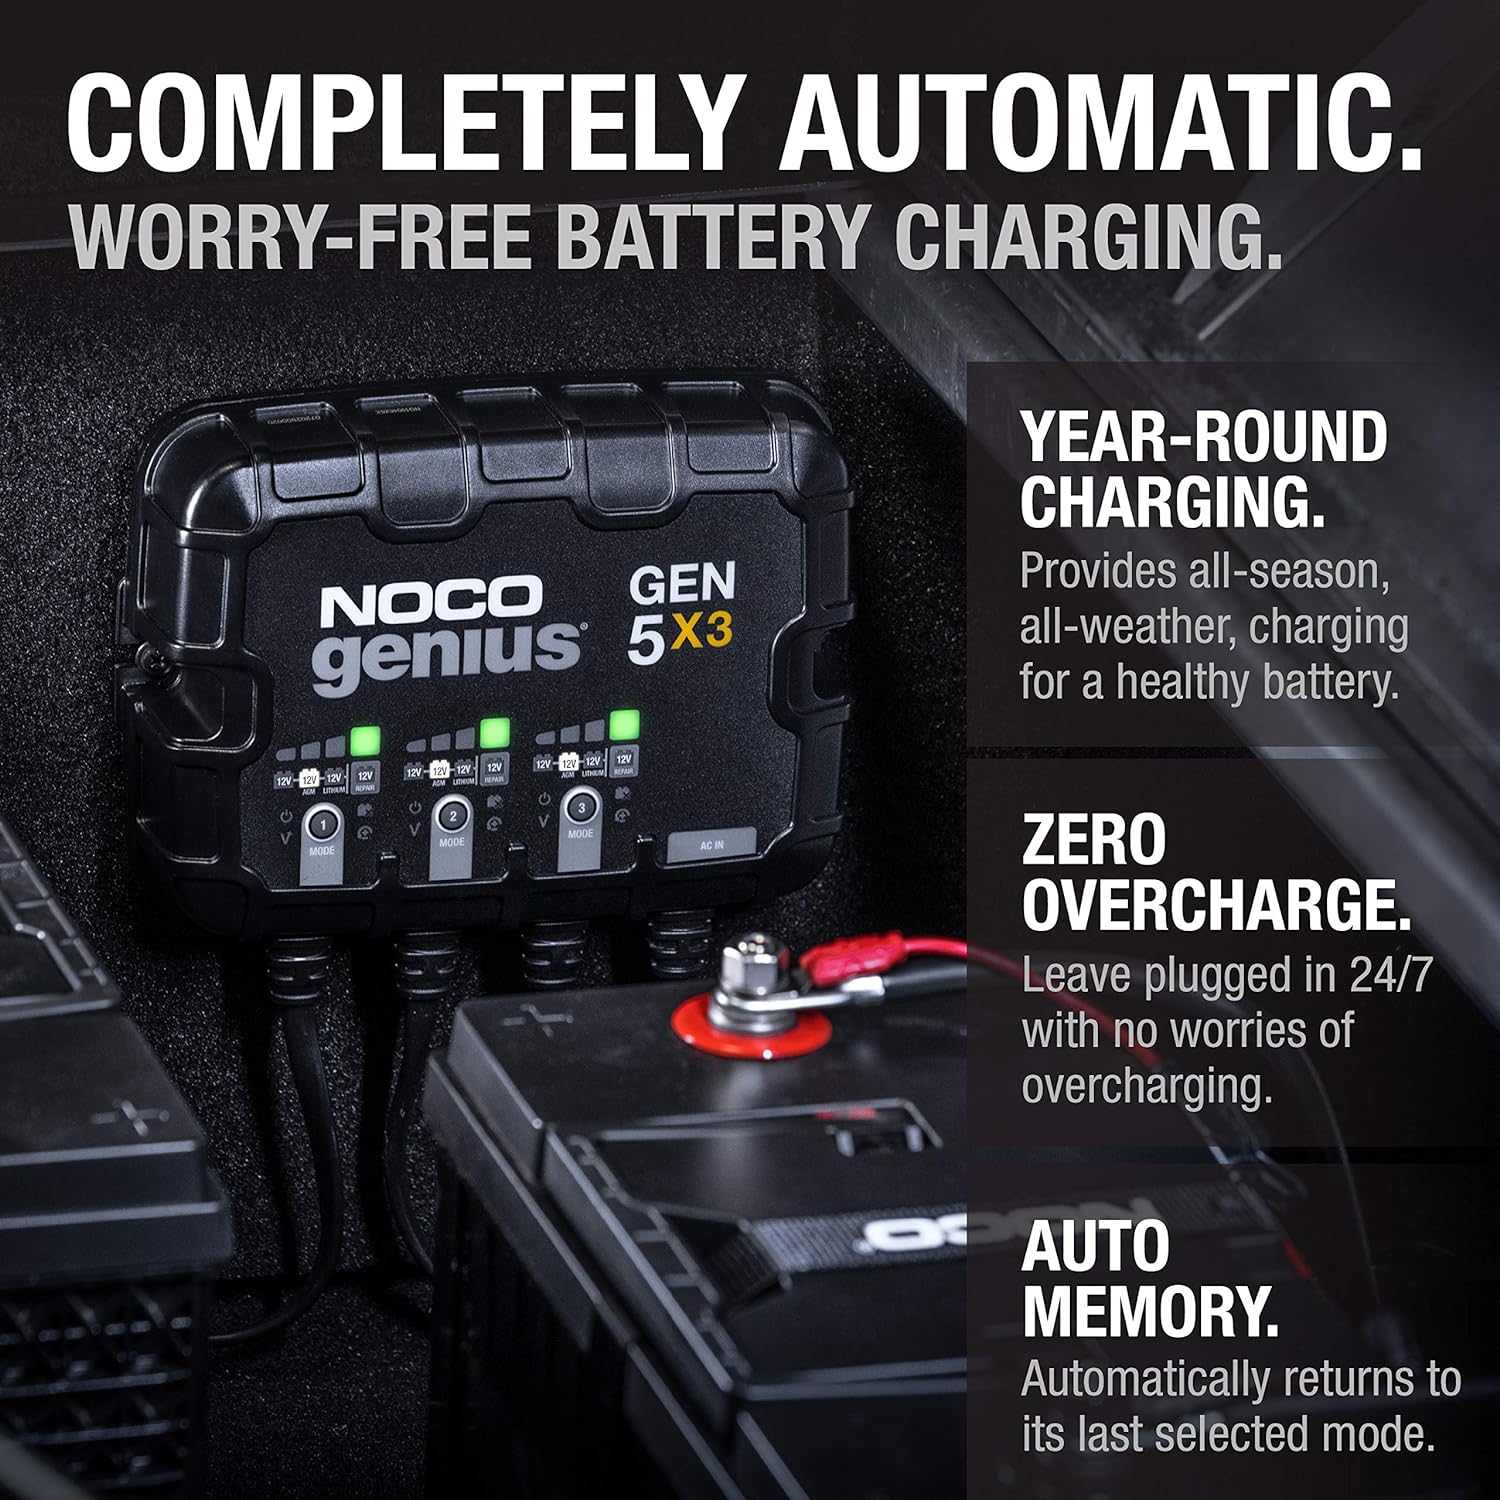 NOCO Genius GEN5X3, 3-Bank, 15A (5A/Bank) Smart Marine Battery Charger, 12V Waterproof Onboard Boat Charger, Battery Maintainer and Desulfator for AGM, Lithium (LiFePO4) and Deep-Cycle Batteries - NOCO Genius GEN5X3 Battery Charger Review